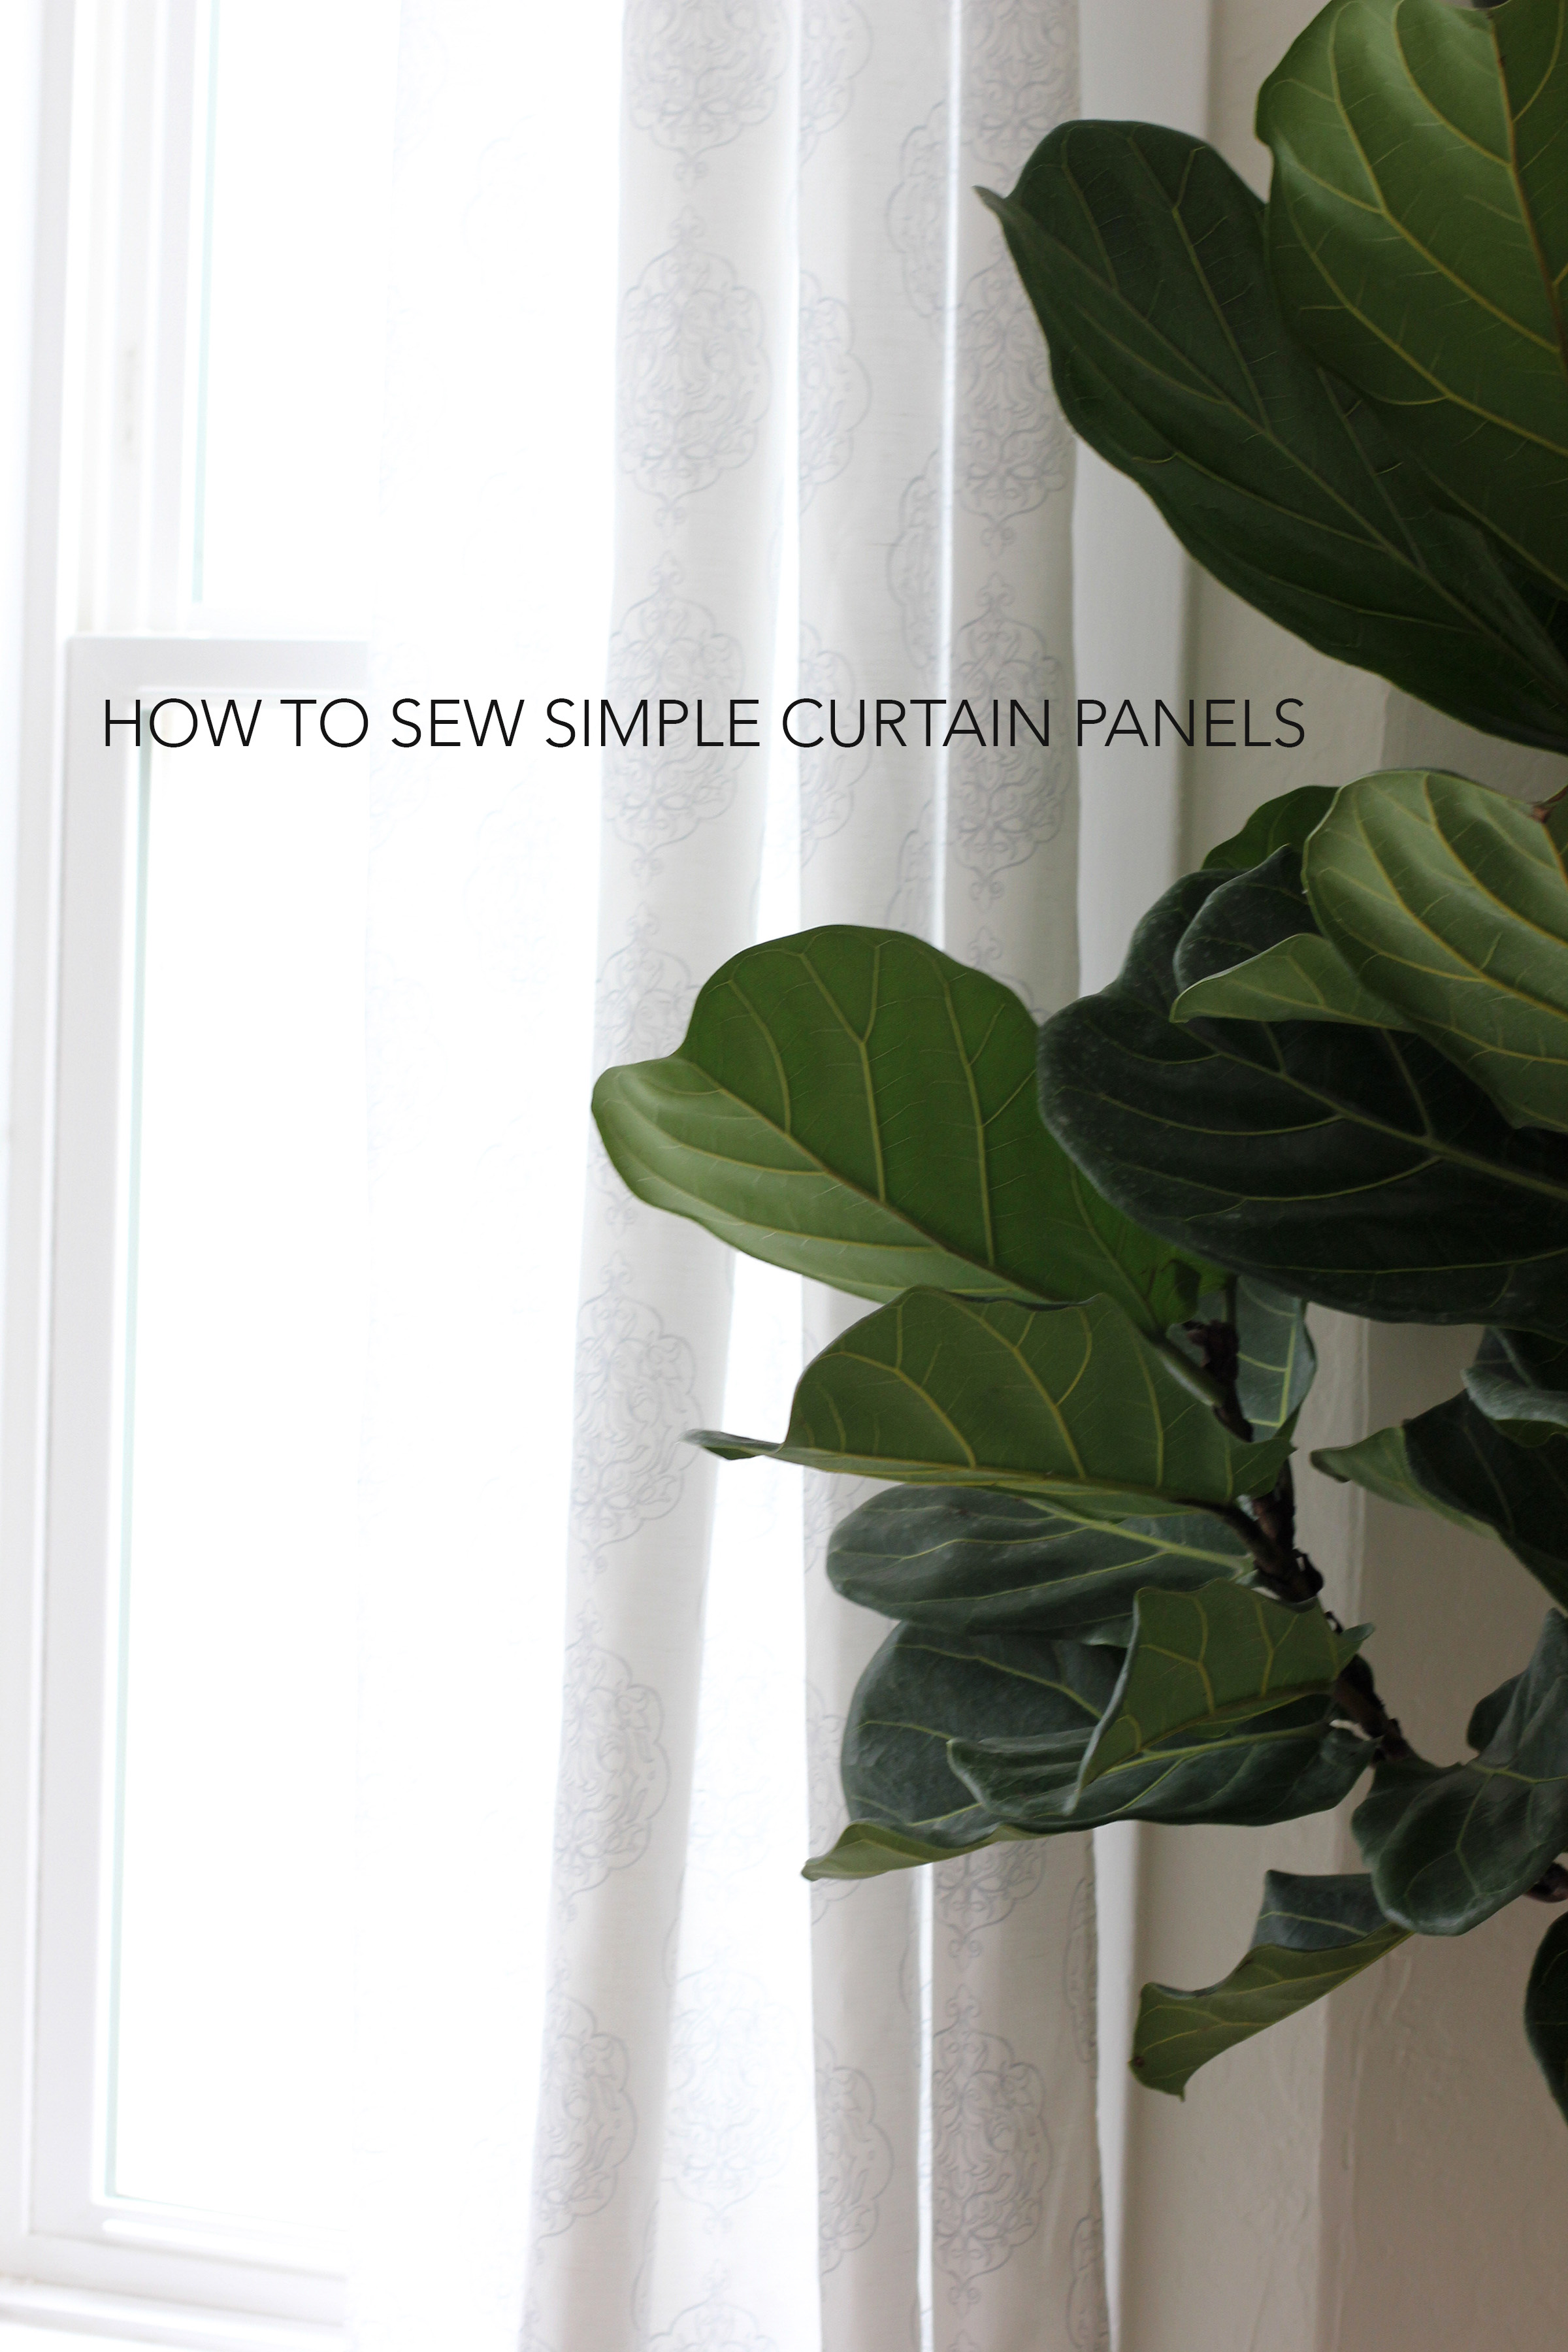 Learn how to make simple curtain panels . This is a great beginner sewing project!